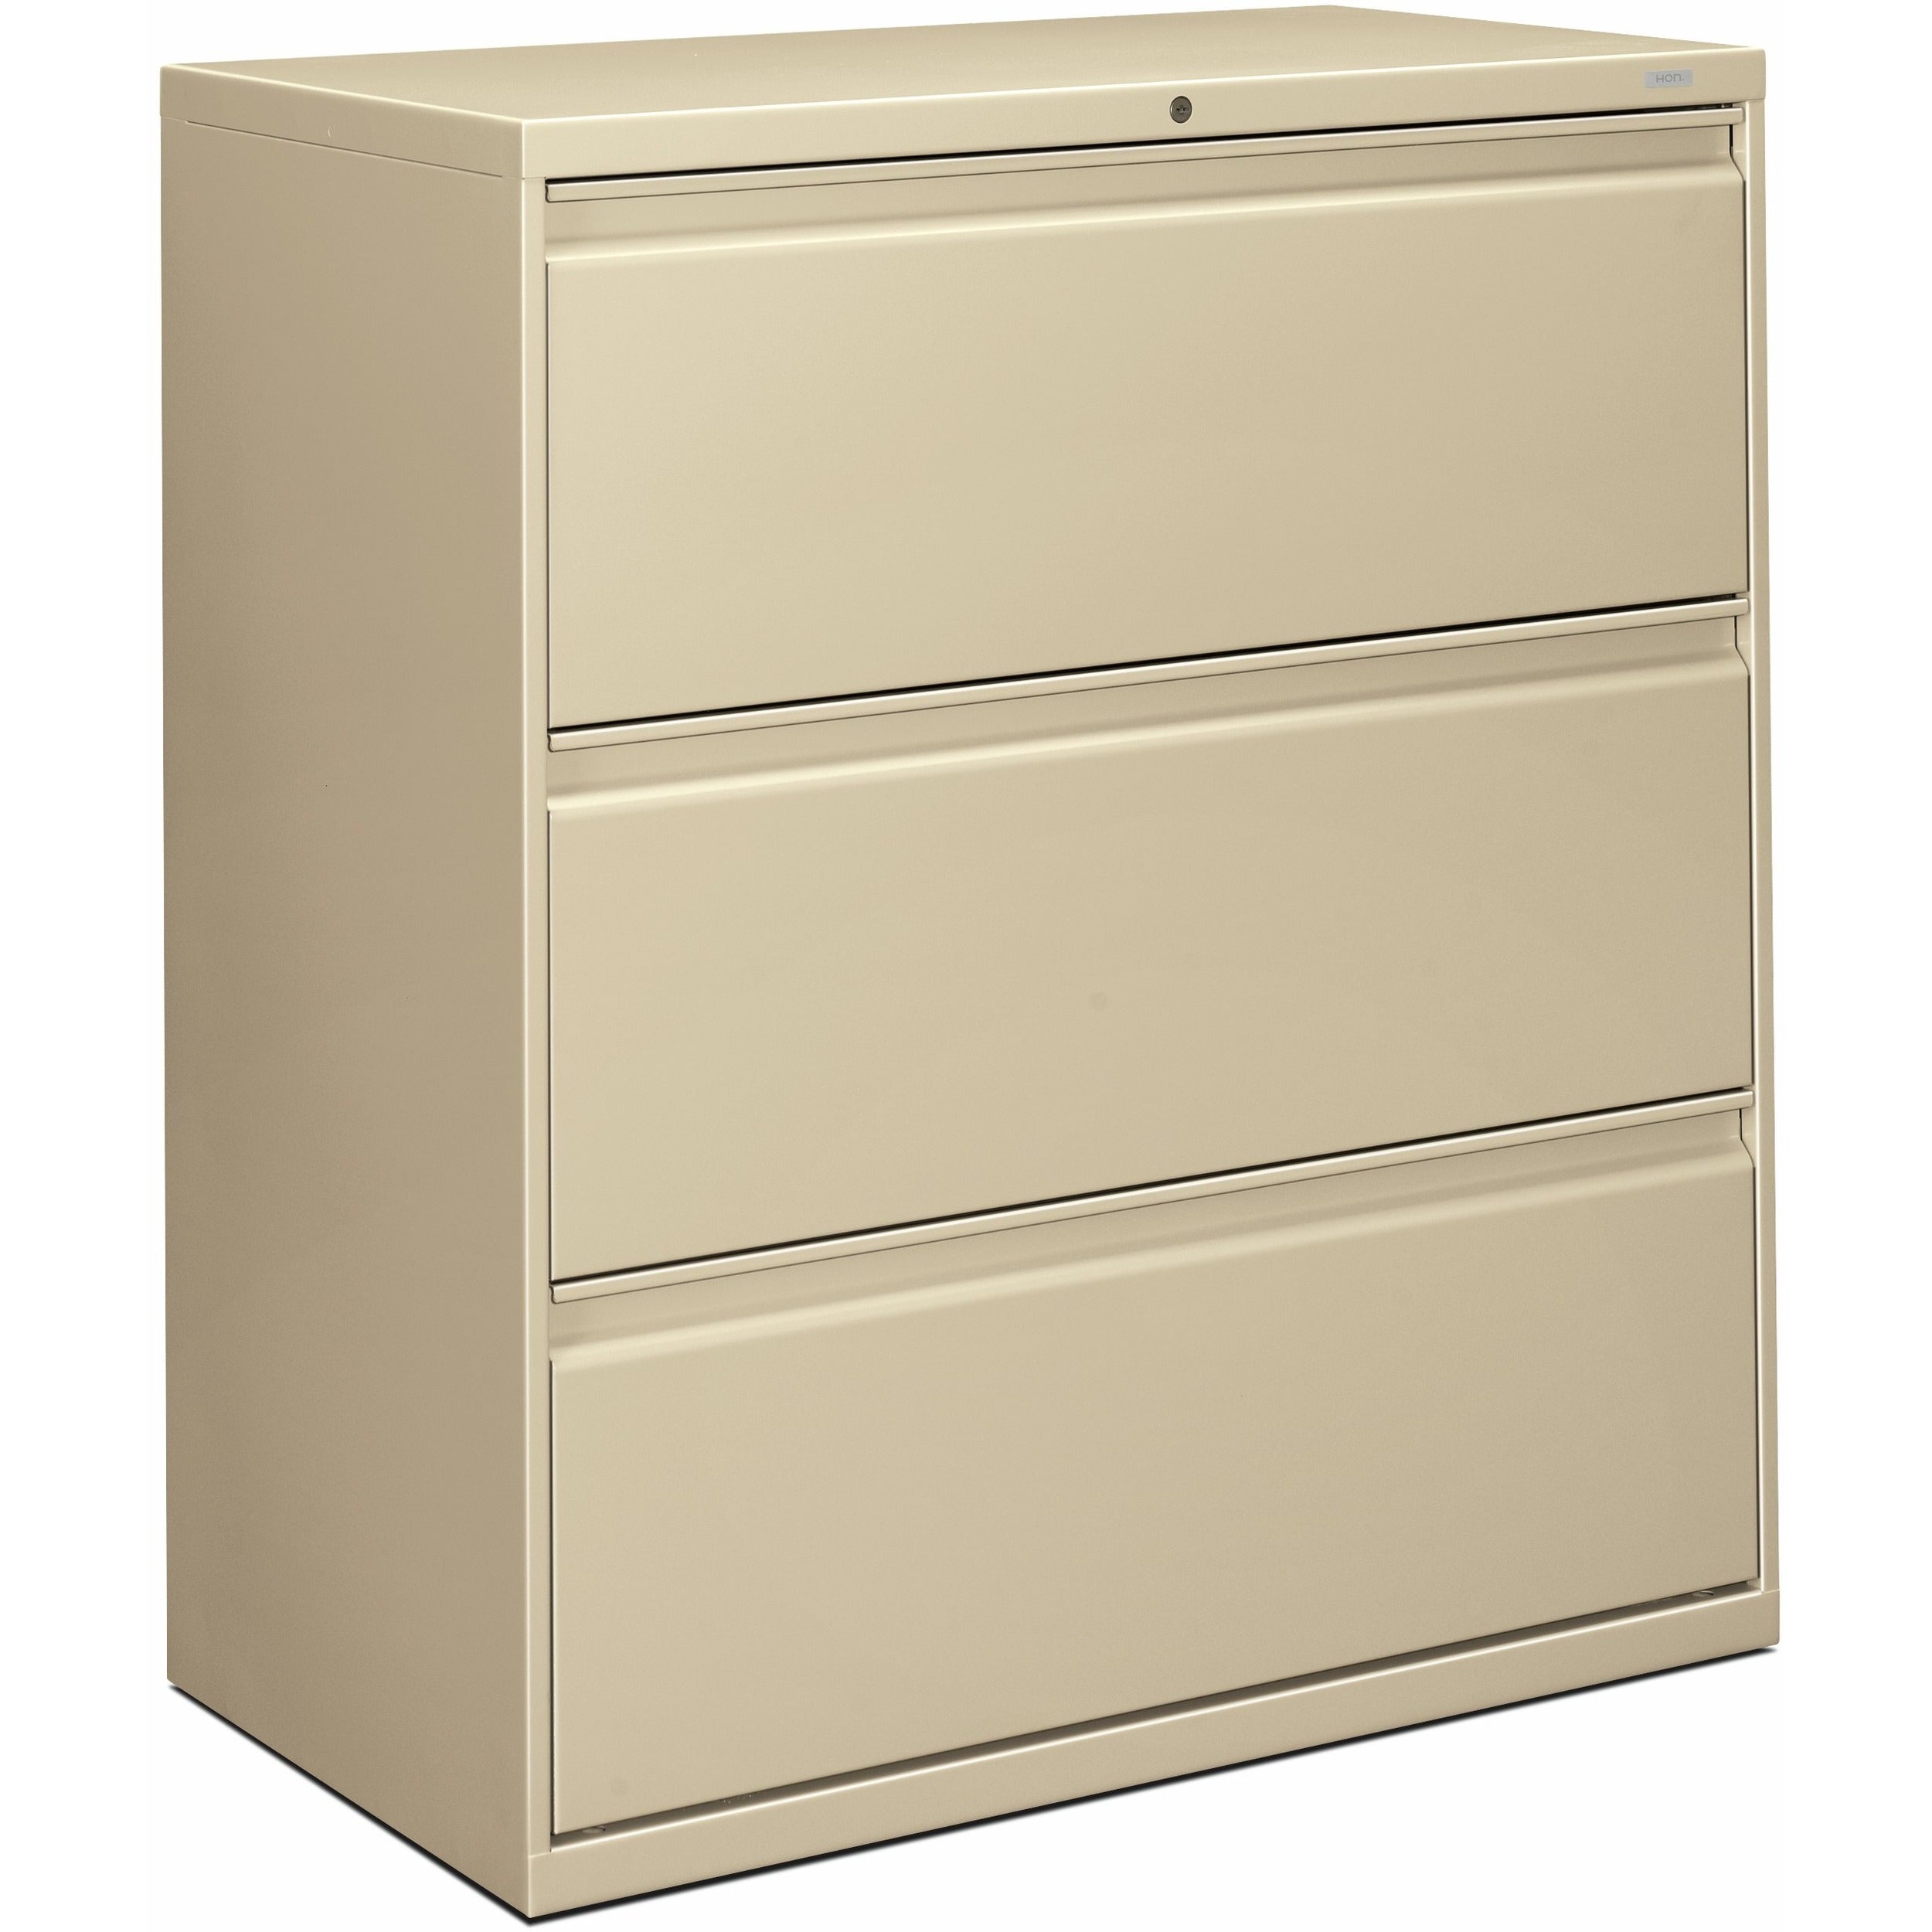 hon-brigade-800-h883-lateral-file-36-x-18409-3-drawers-finish-putty_hon883ll - 1